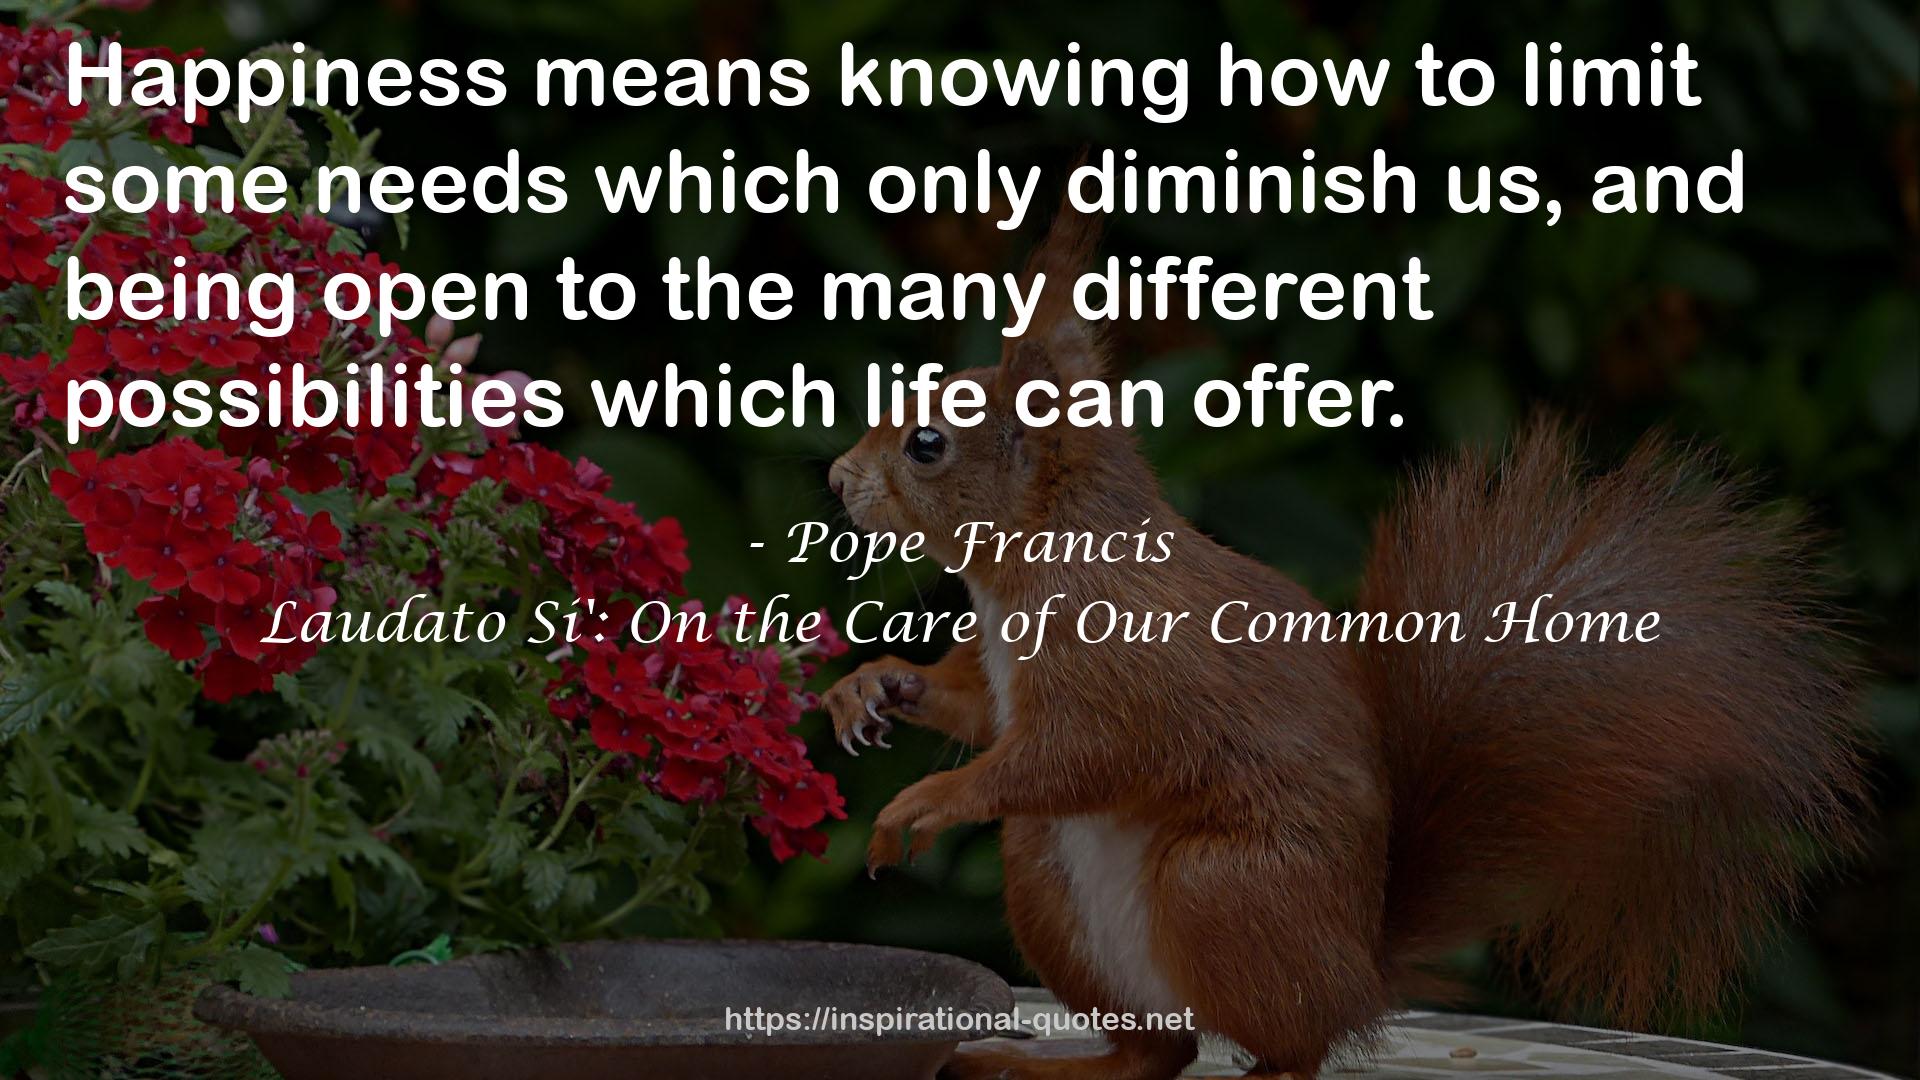 Laudato Si': On the Care of Our Common Home QUOTES